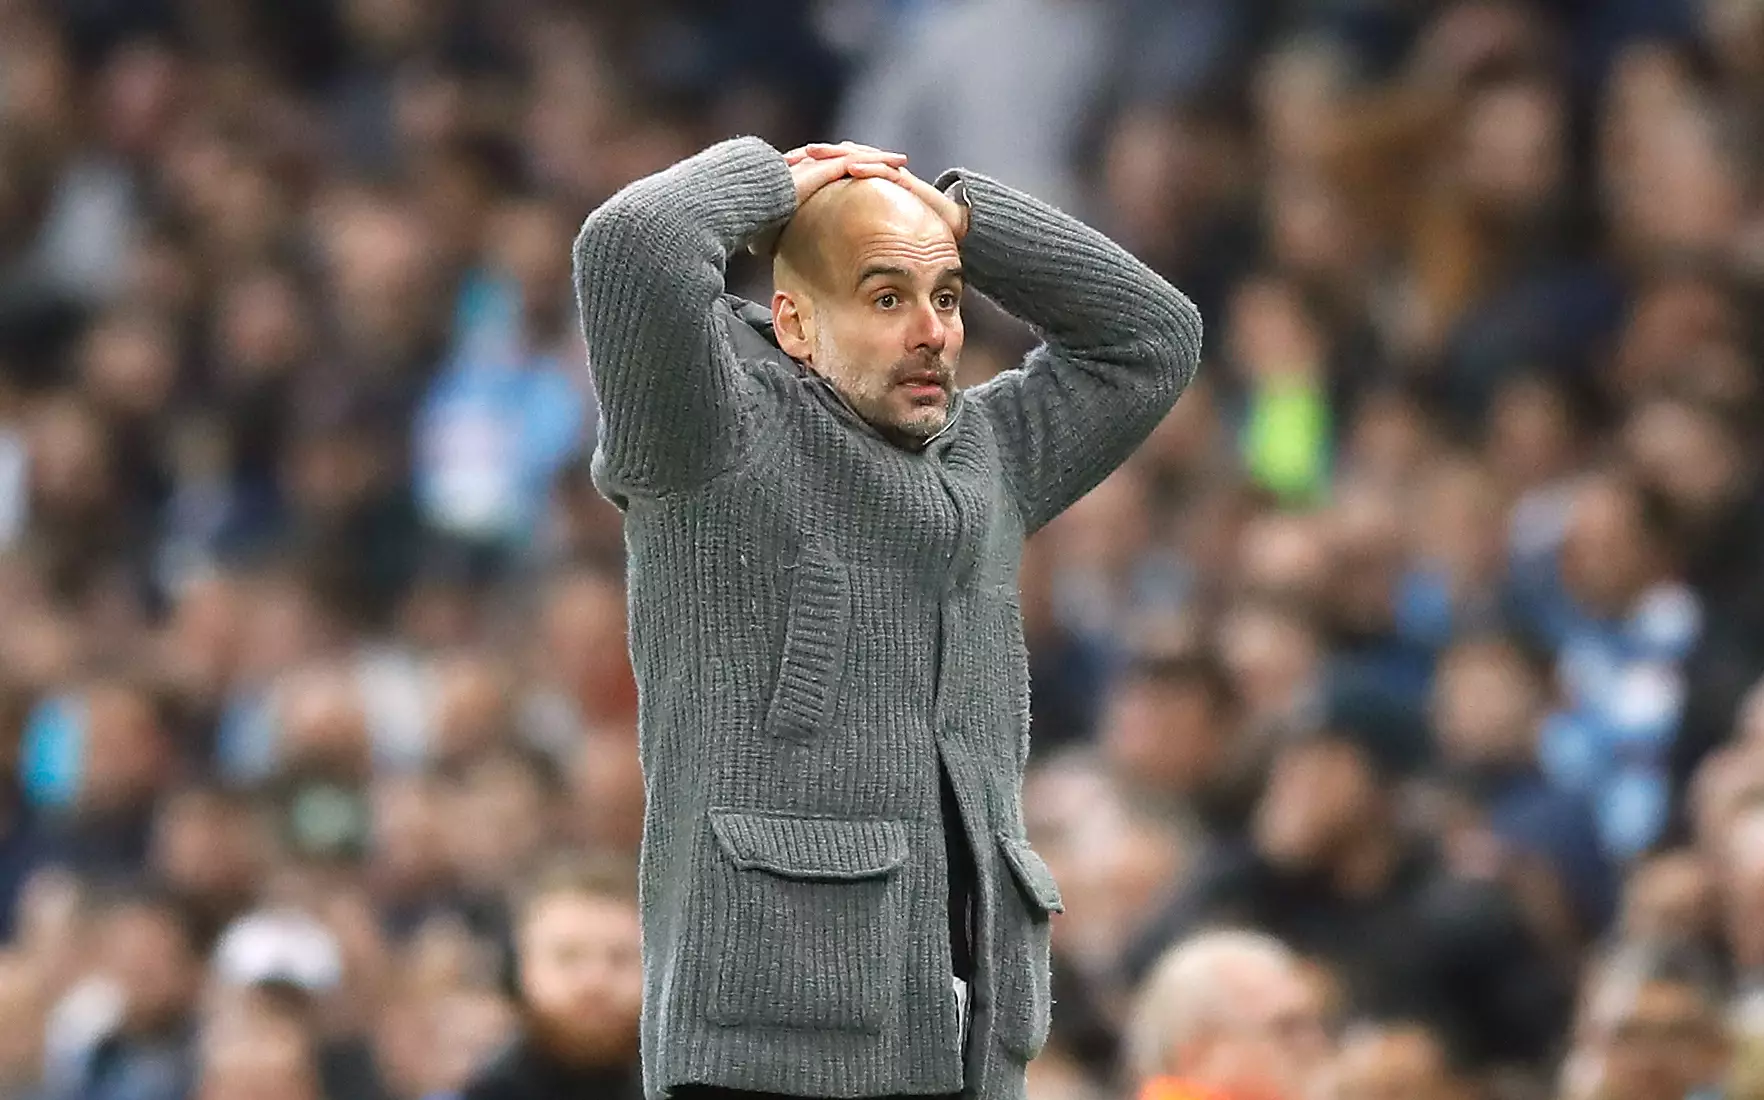 Macaulay thinks Pep will get over City's Champions League issues to complete an incredible quadruple. Image: PA Images